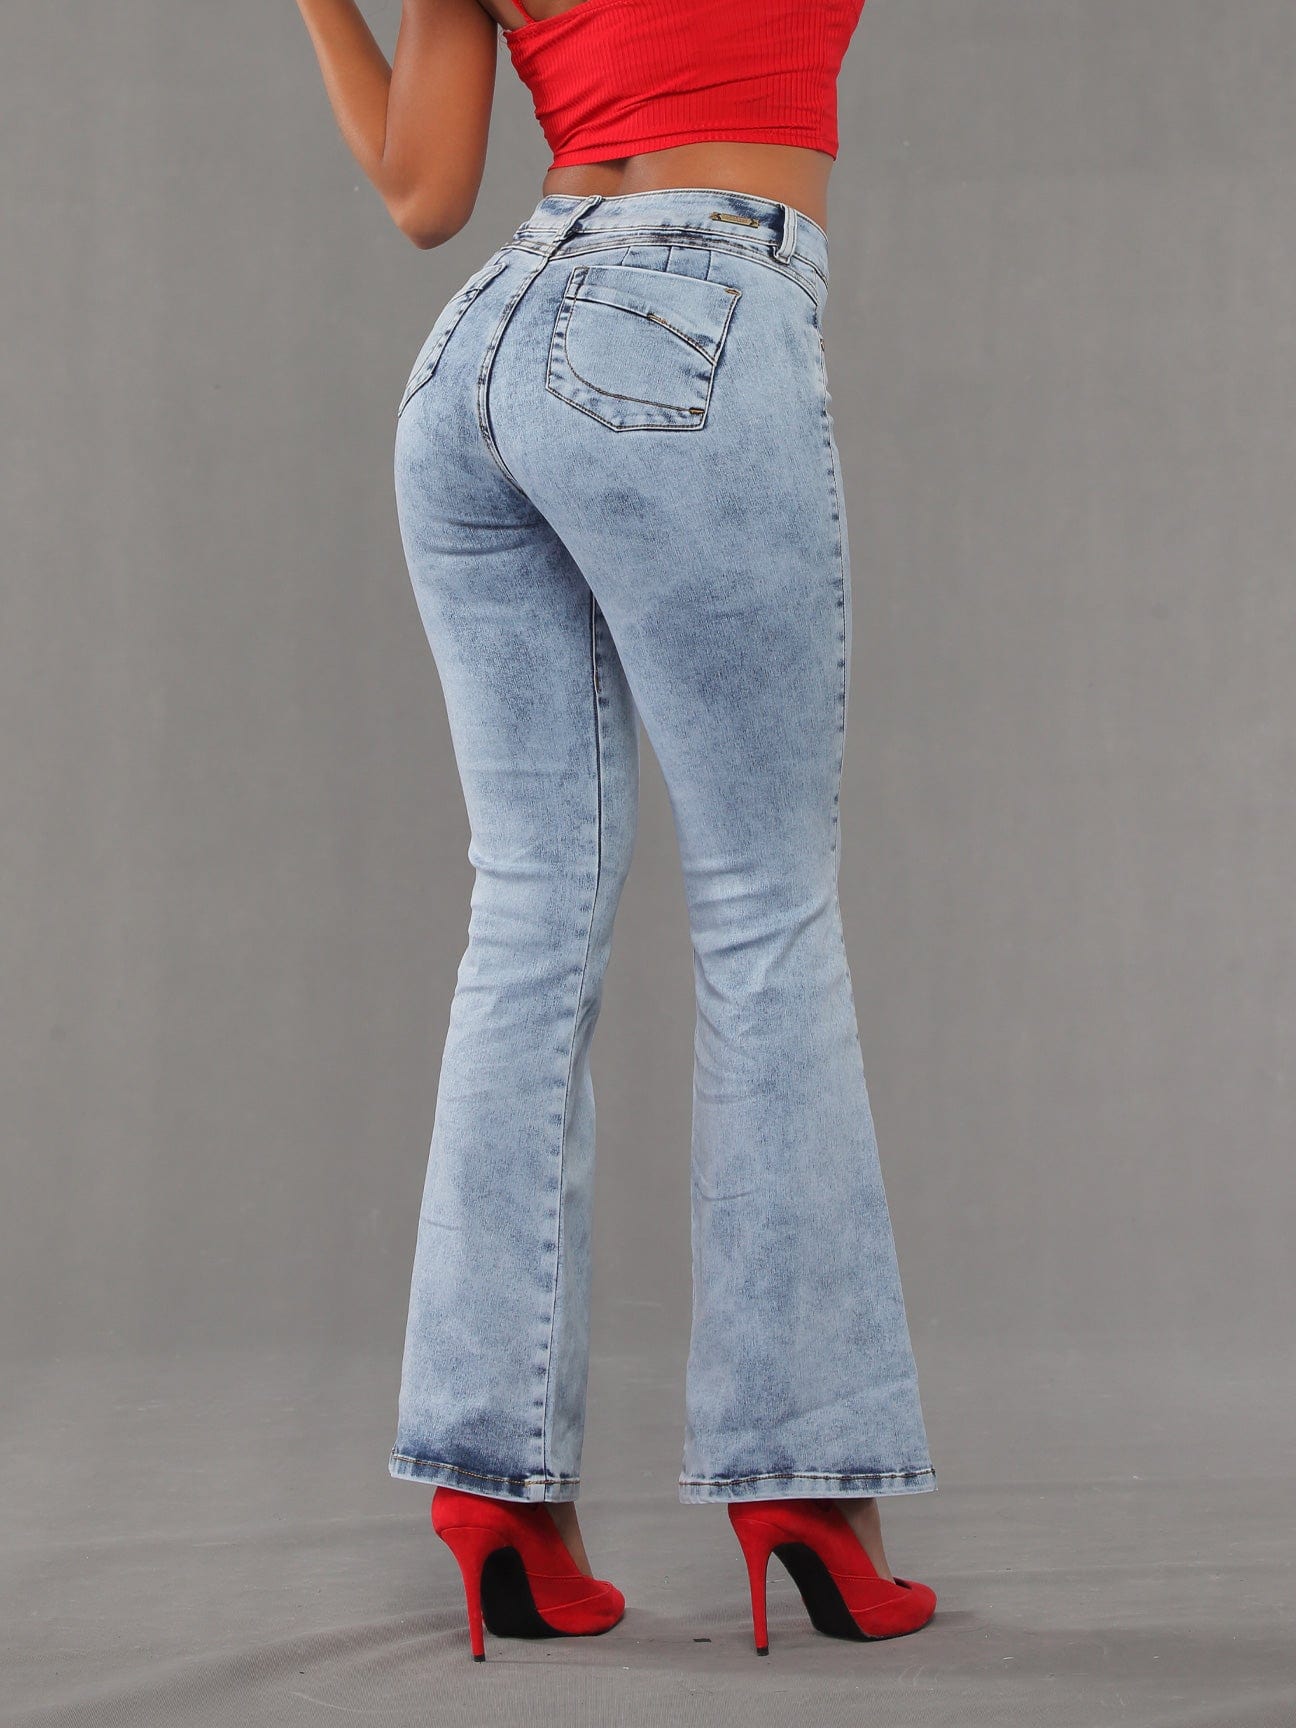 Colombian Jeans For Women Butt Baggy High Waist Curvy Jeans Making Bottom  Sexy Enhance Tummy Control Ouc021 X0708 From 33,16 €